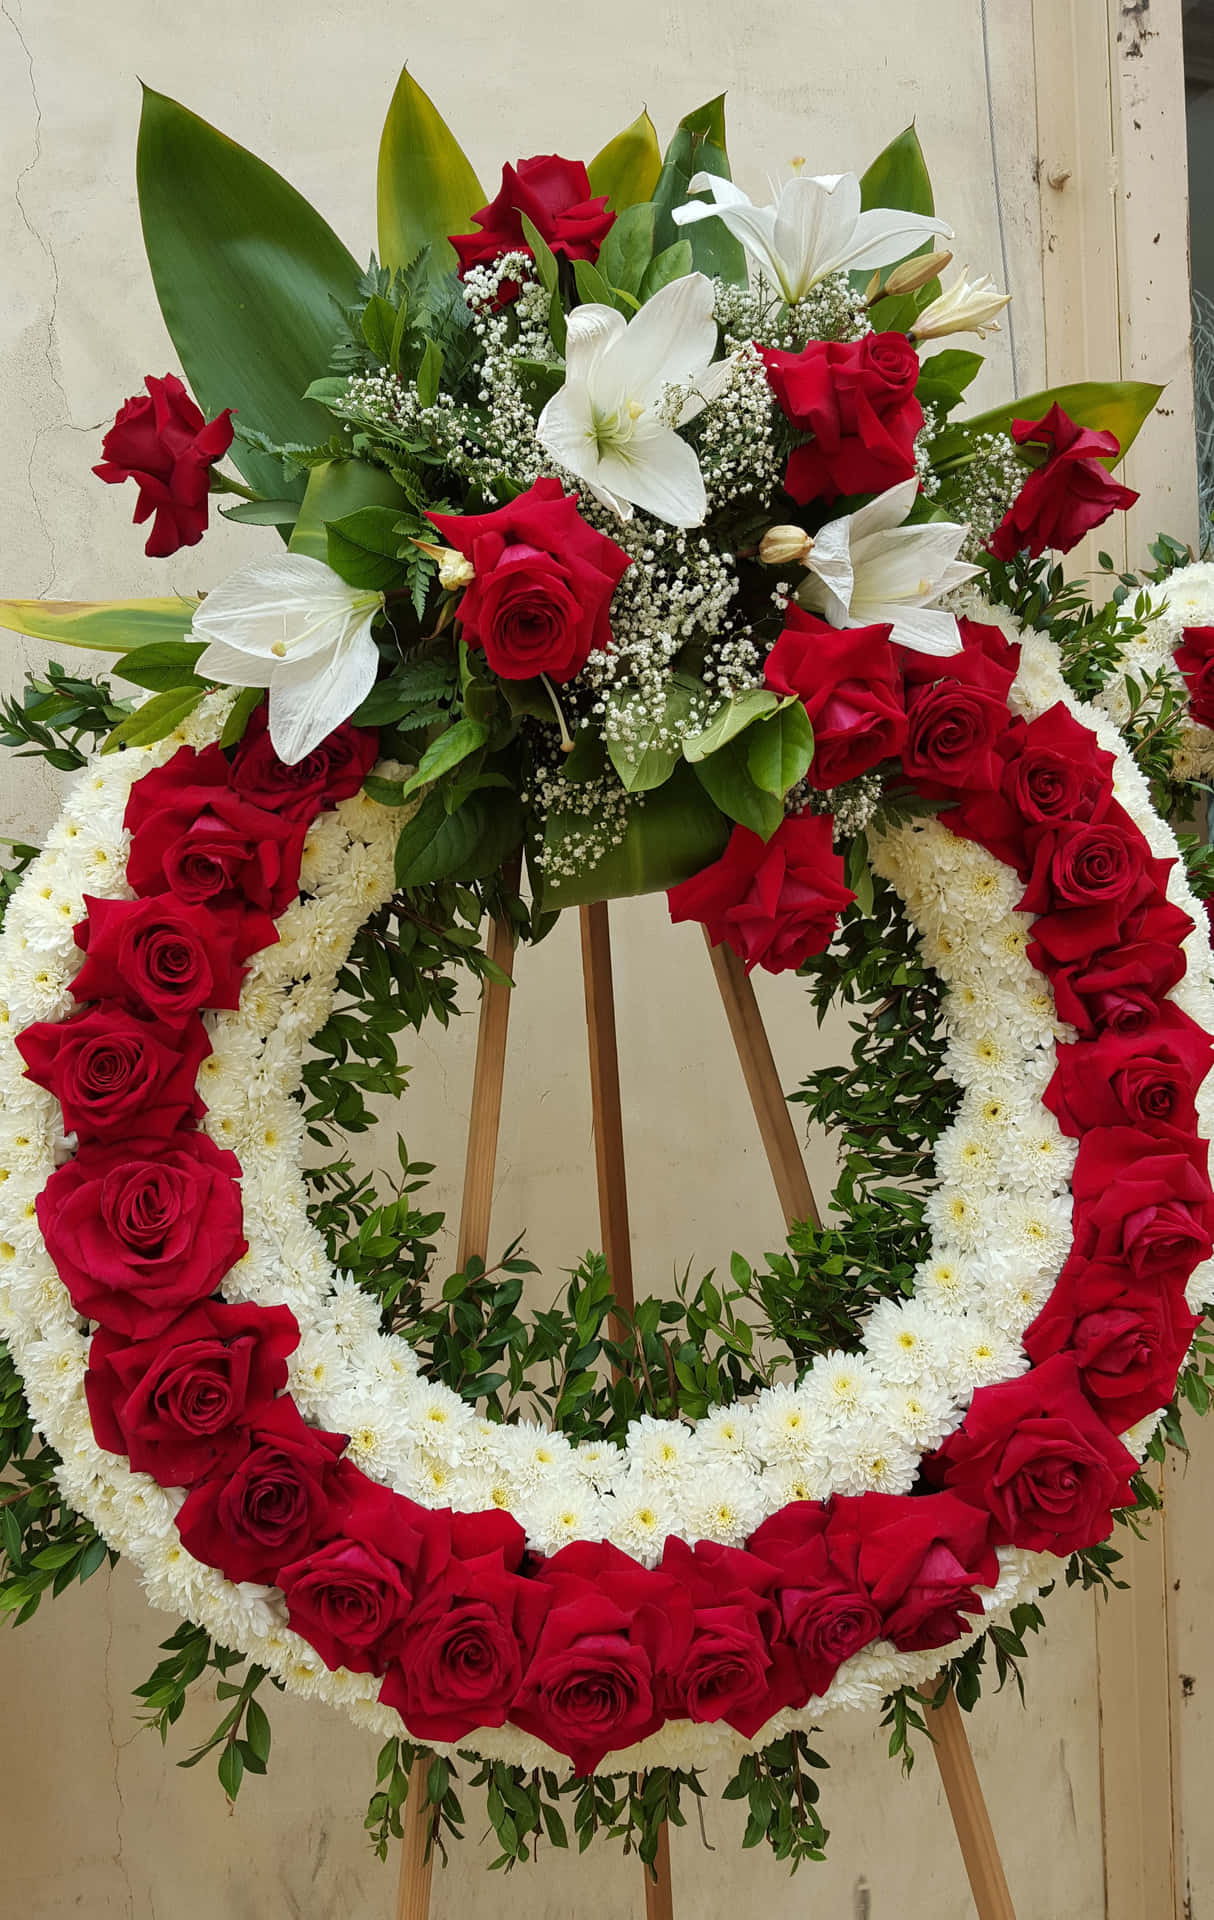 An abundance of warm-colored funeral flower arrangements offering tenderness and respect.